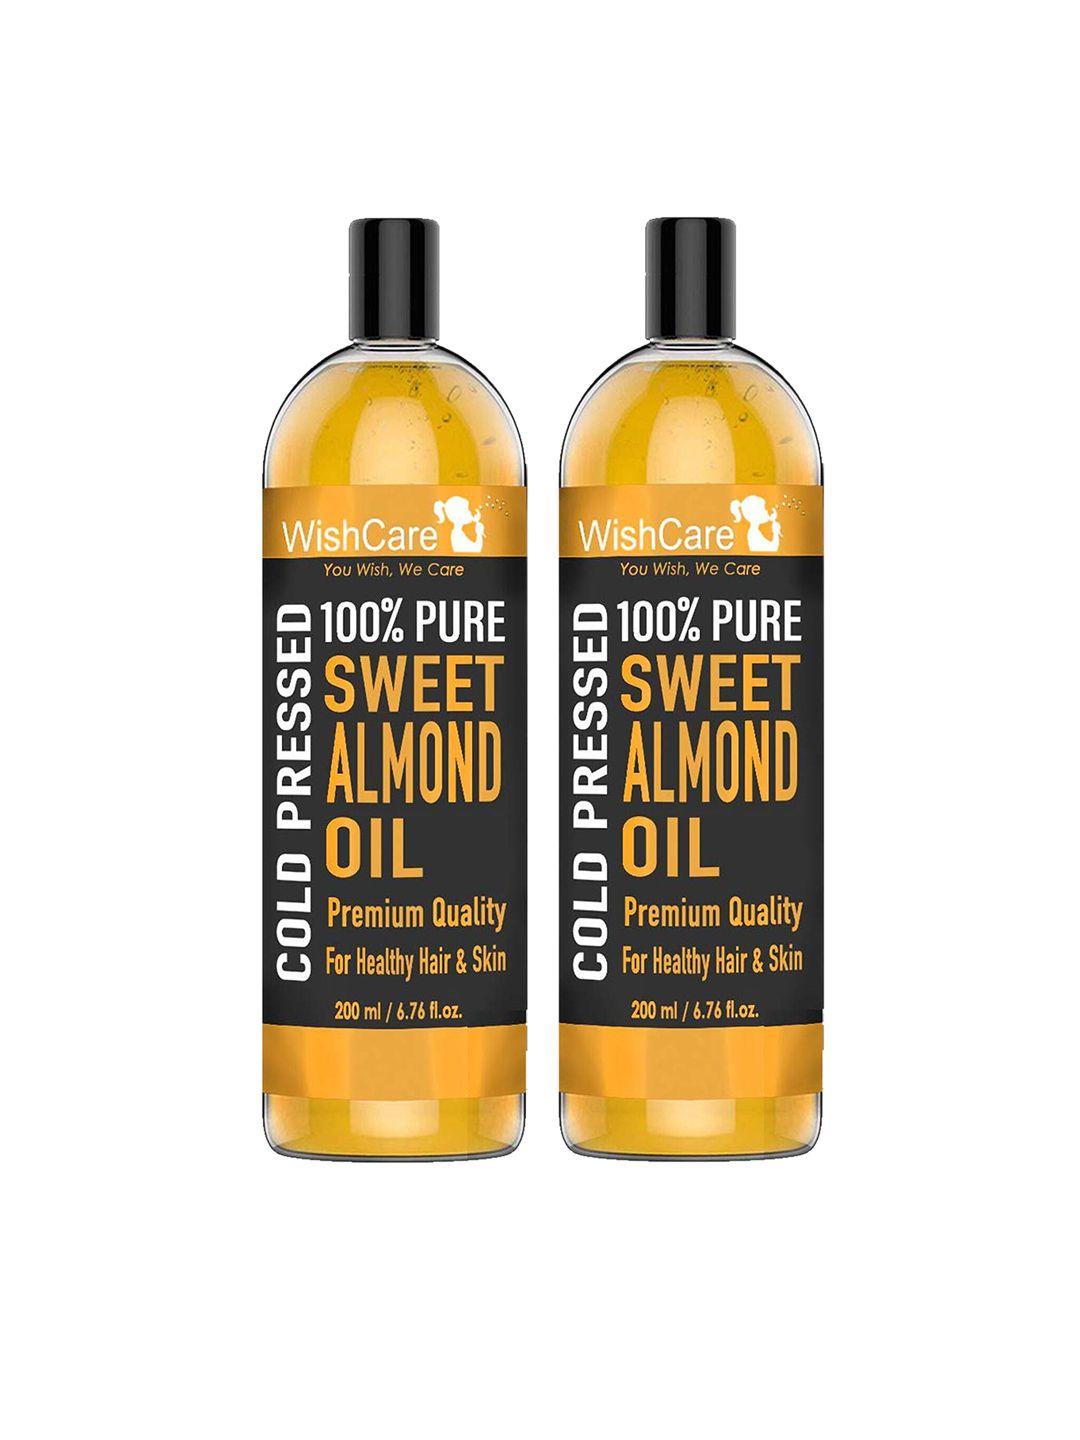 wishcare set of 2 100% pure cold pressed sweet almond oil - 200 ml each